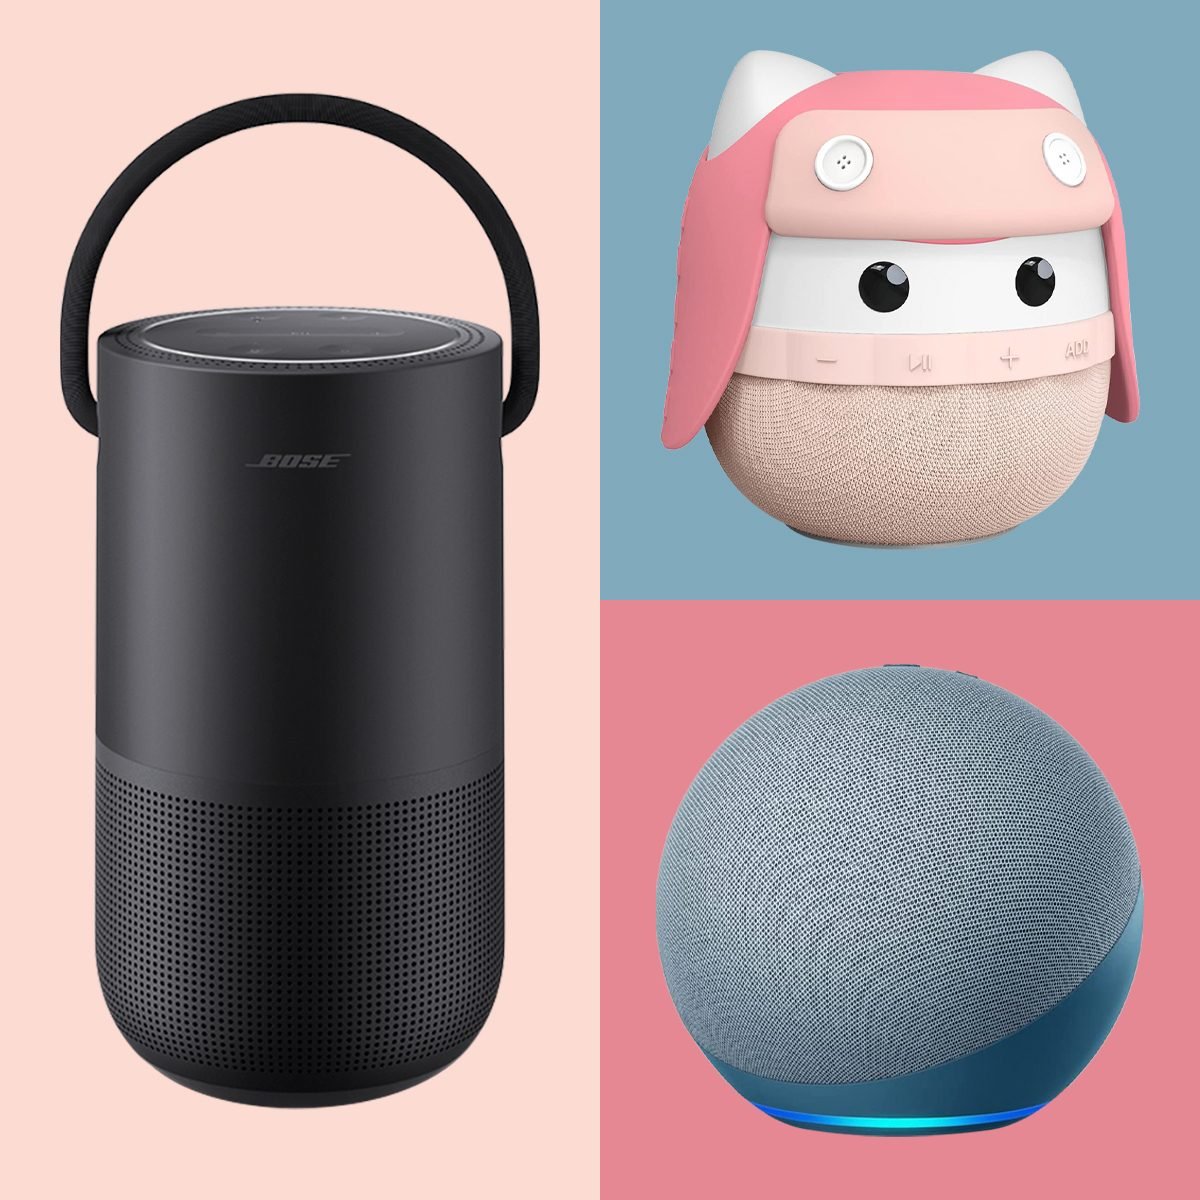 The Best Smart Speakers That Are Helpful And Entertaining Via Merchant3